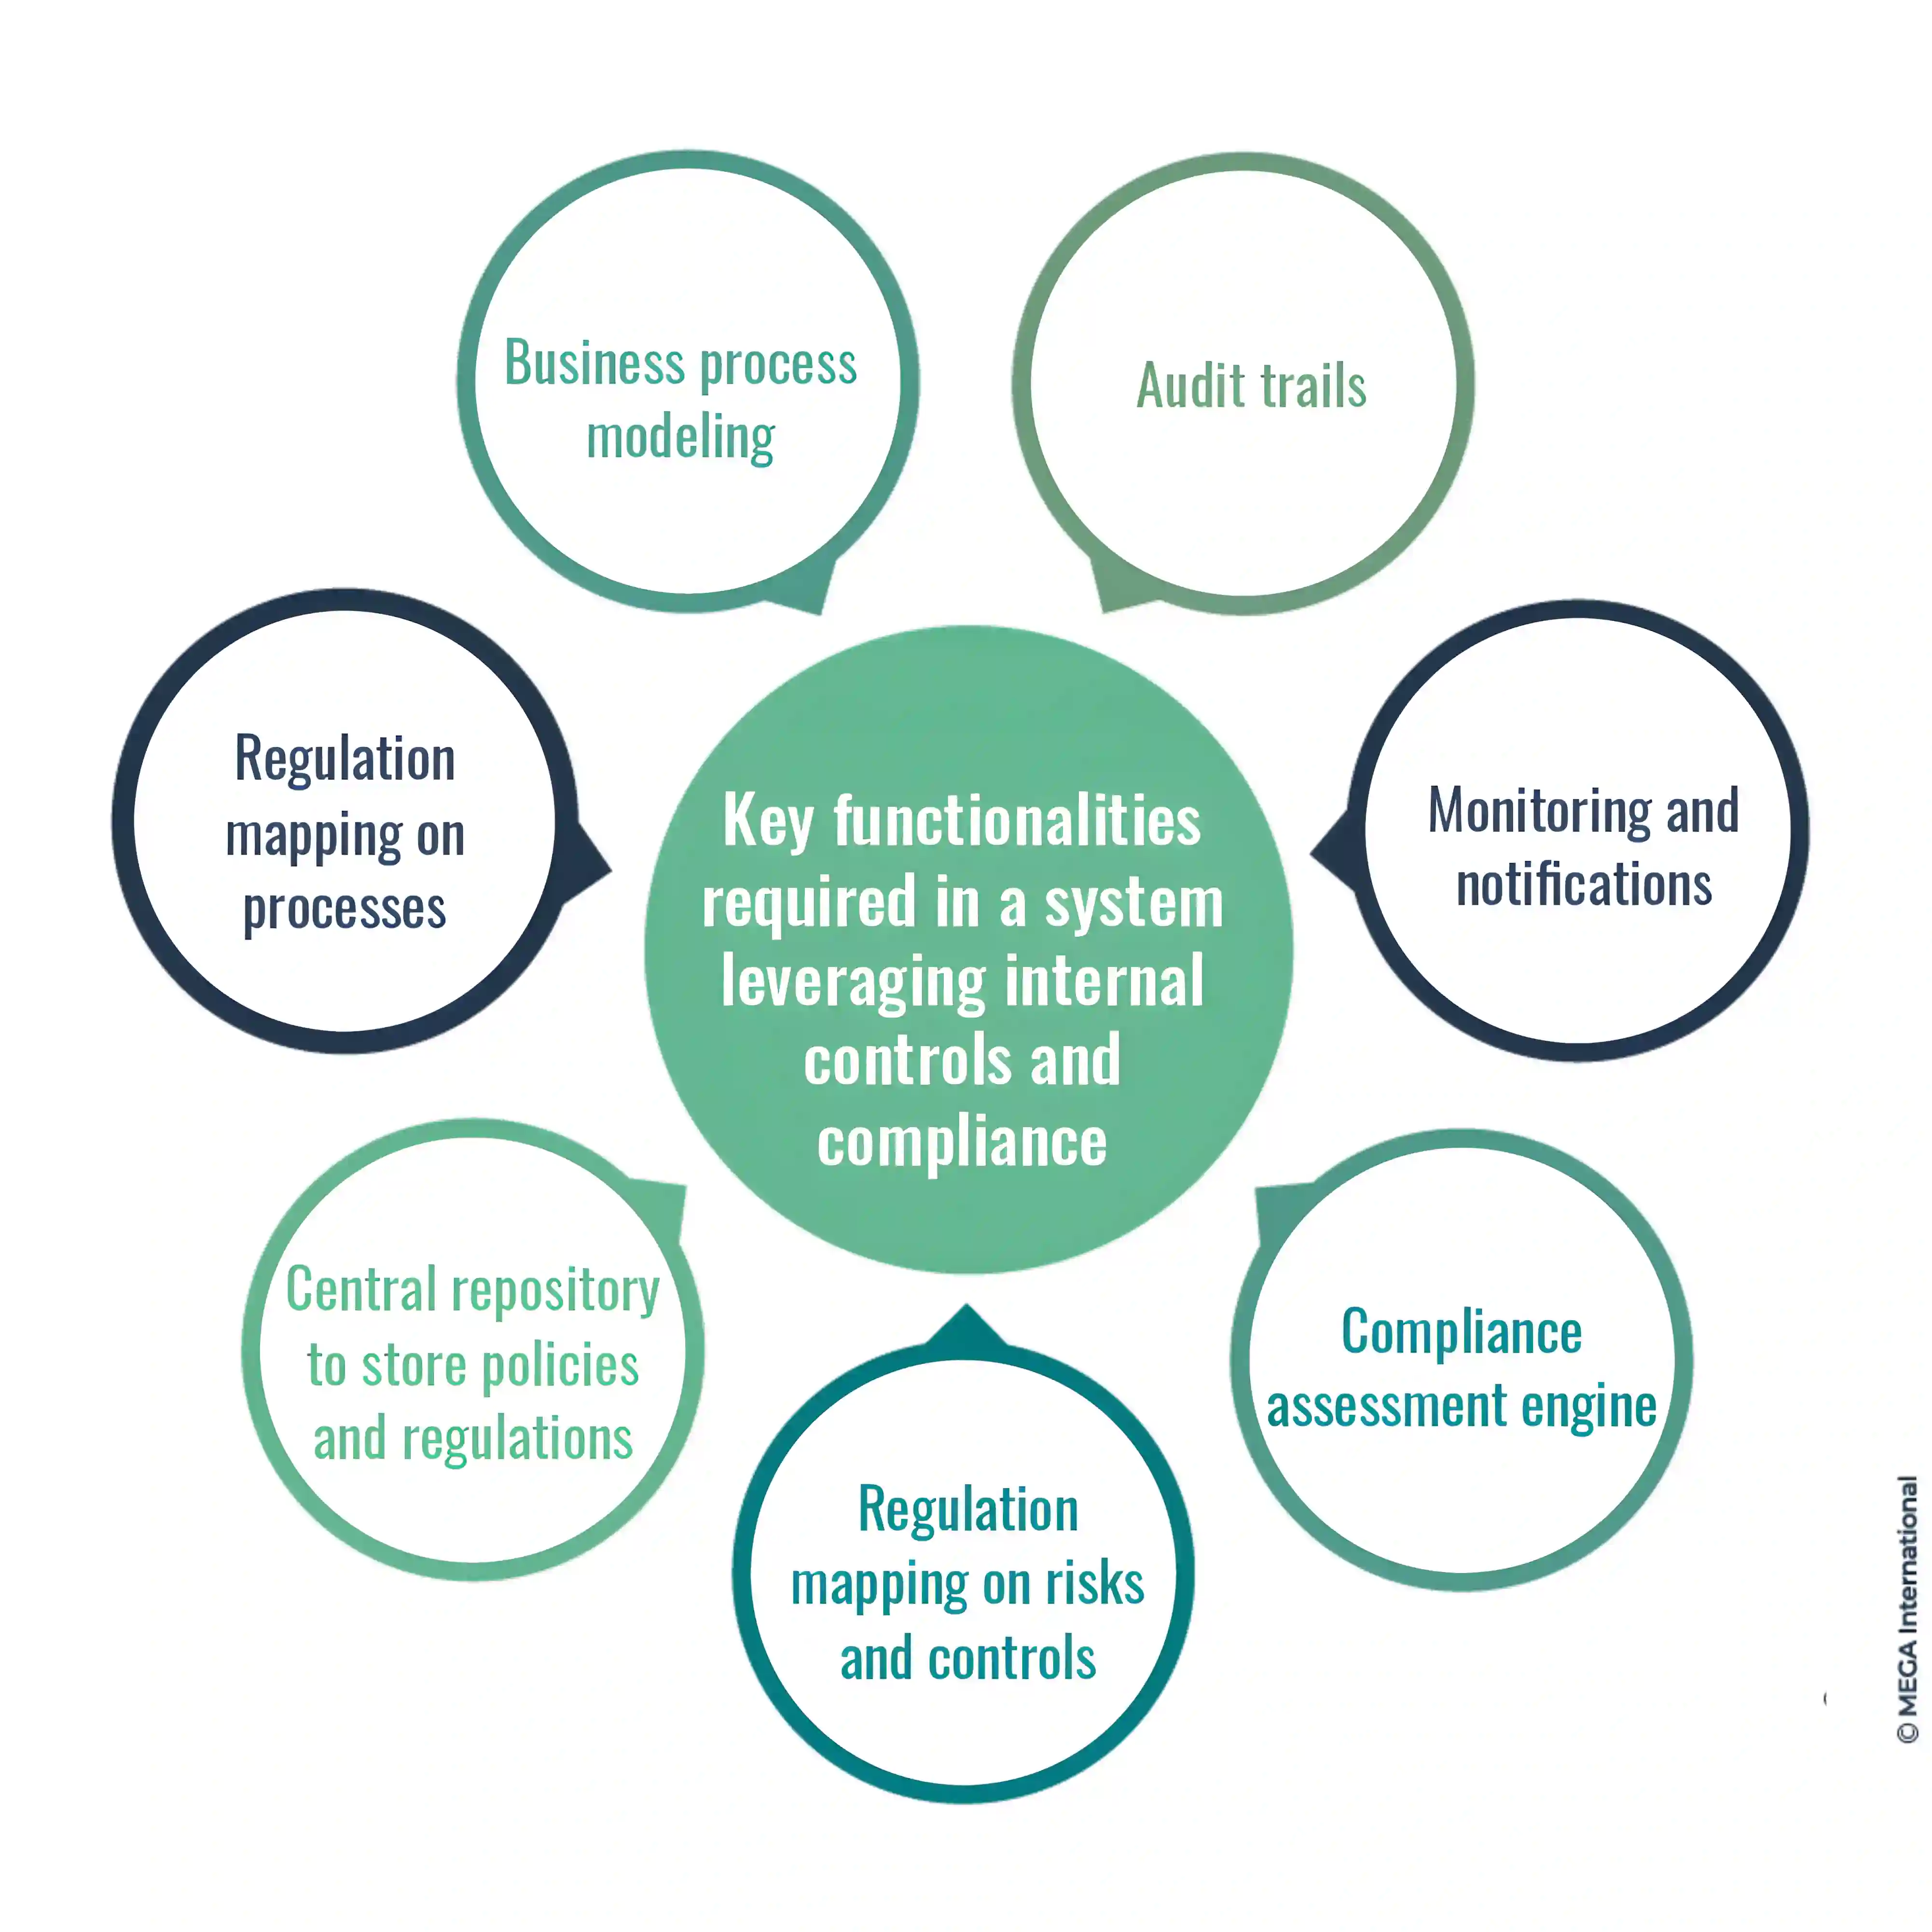 Key functionalities required in a system leveraging internal controls and compliance 